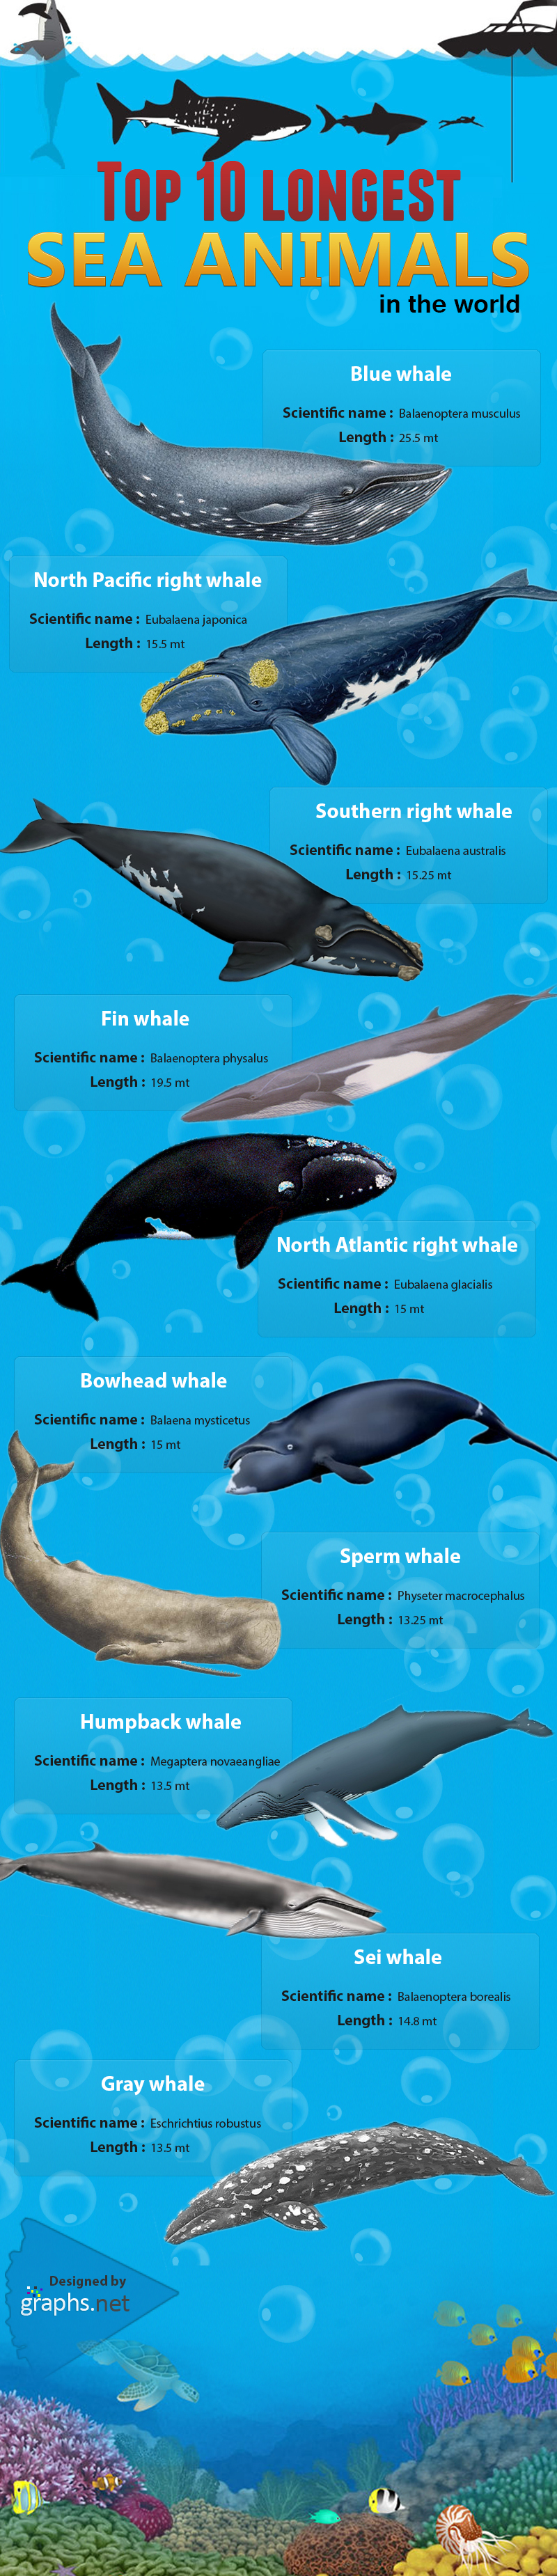 Infographic - top-10-longest-sea-animals-in-the-world